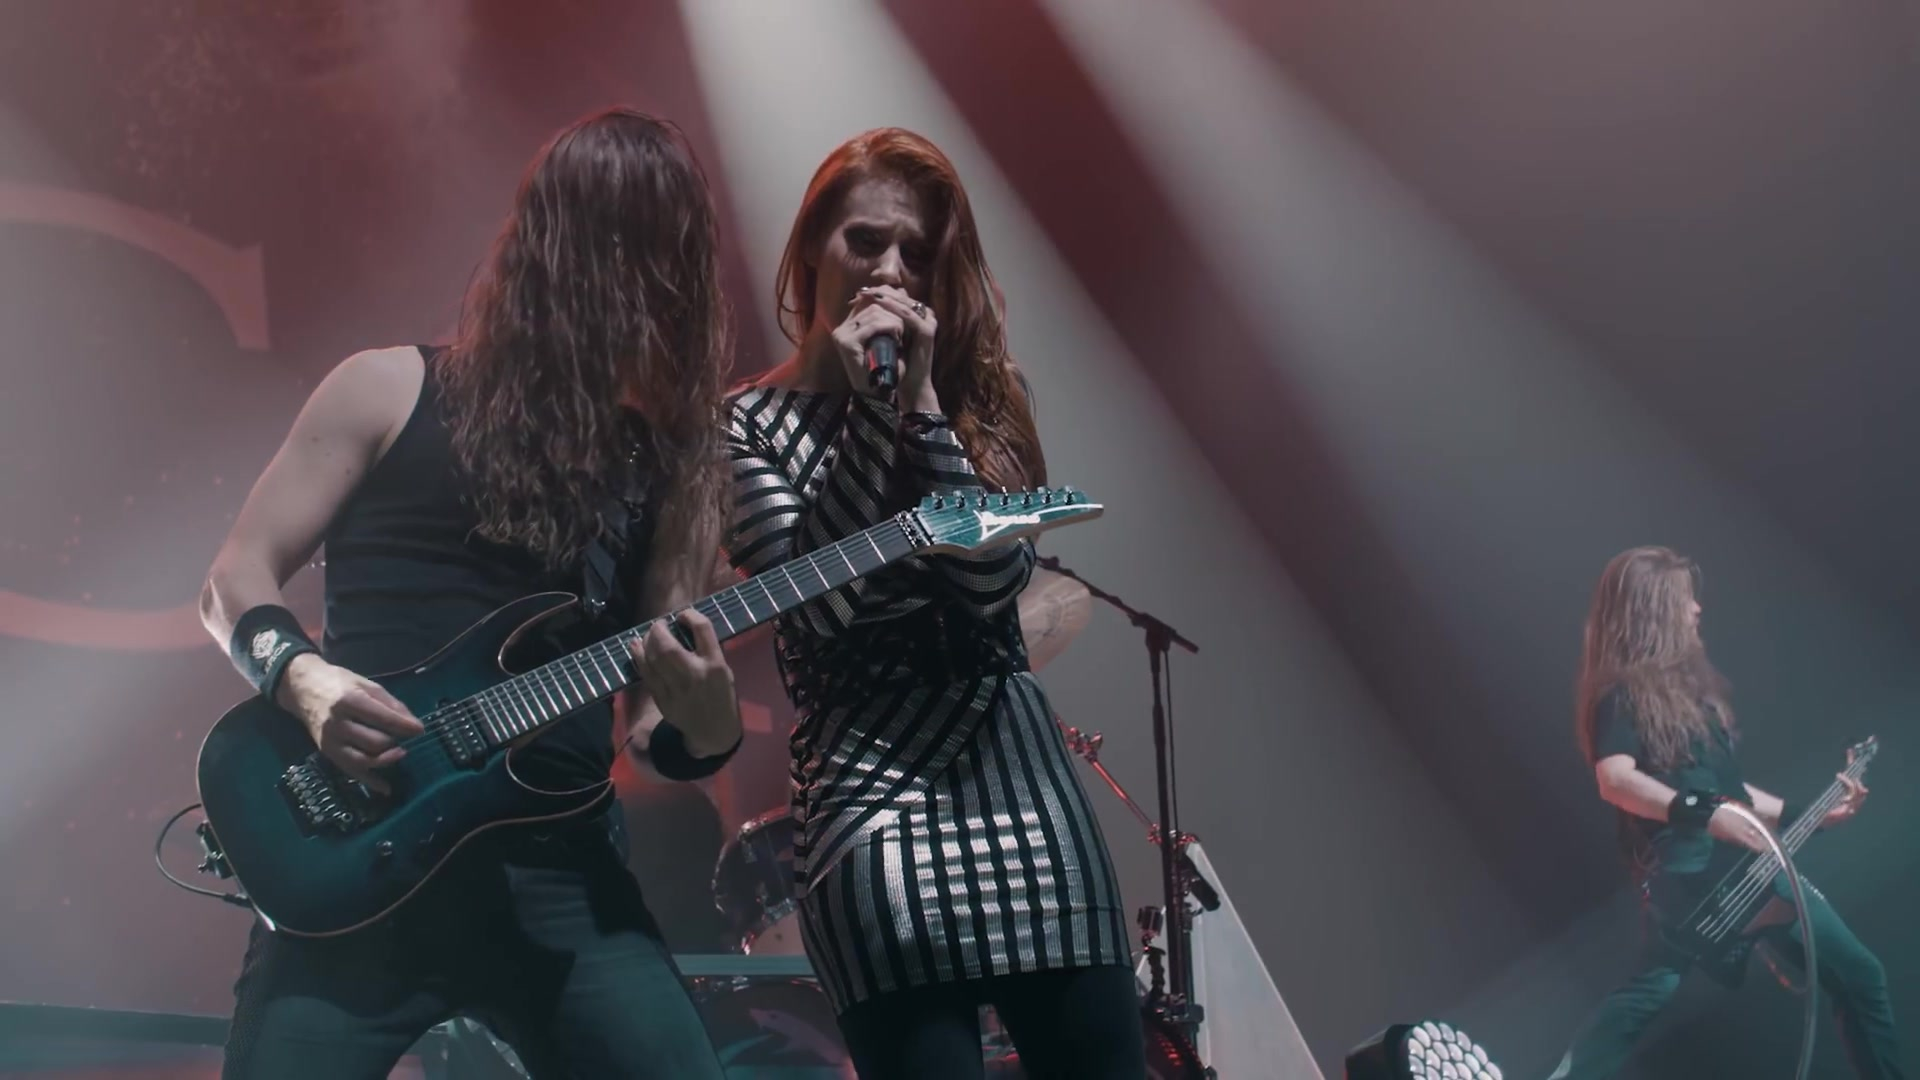 Epica - Beyond The Matrix (Live at the Zenith)